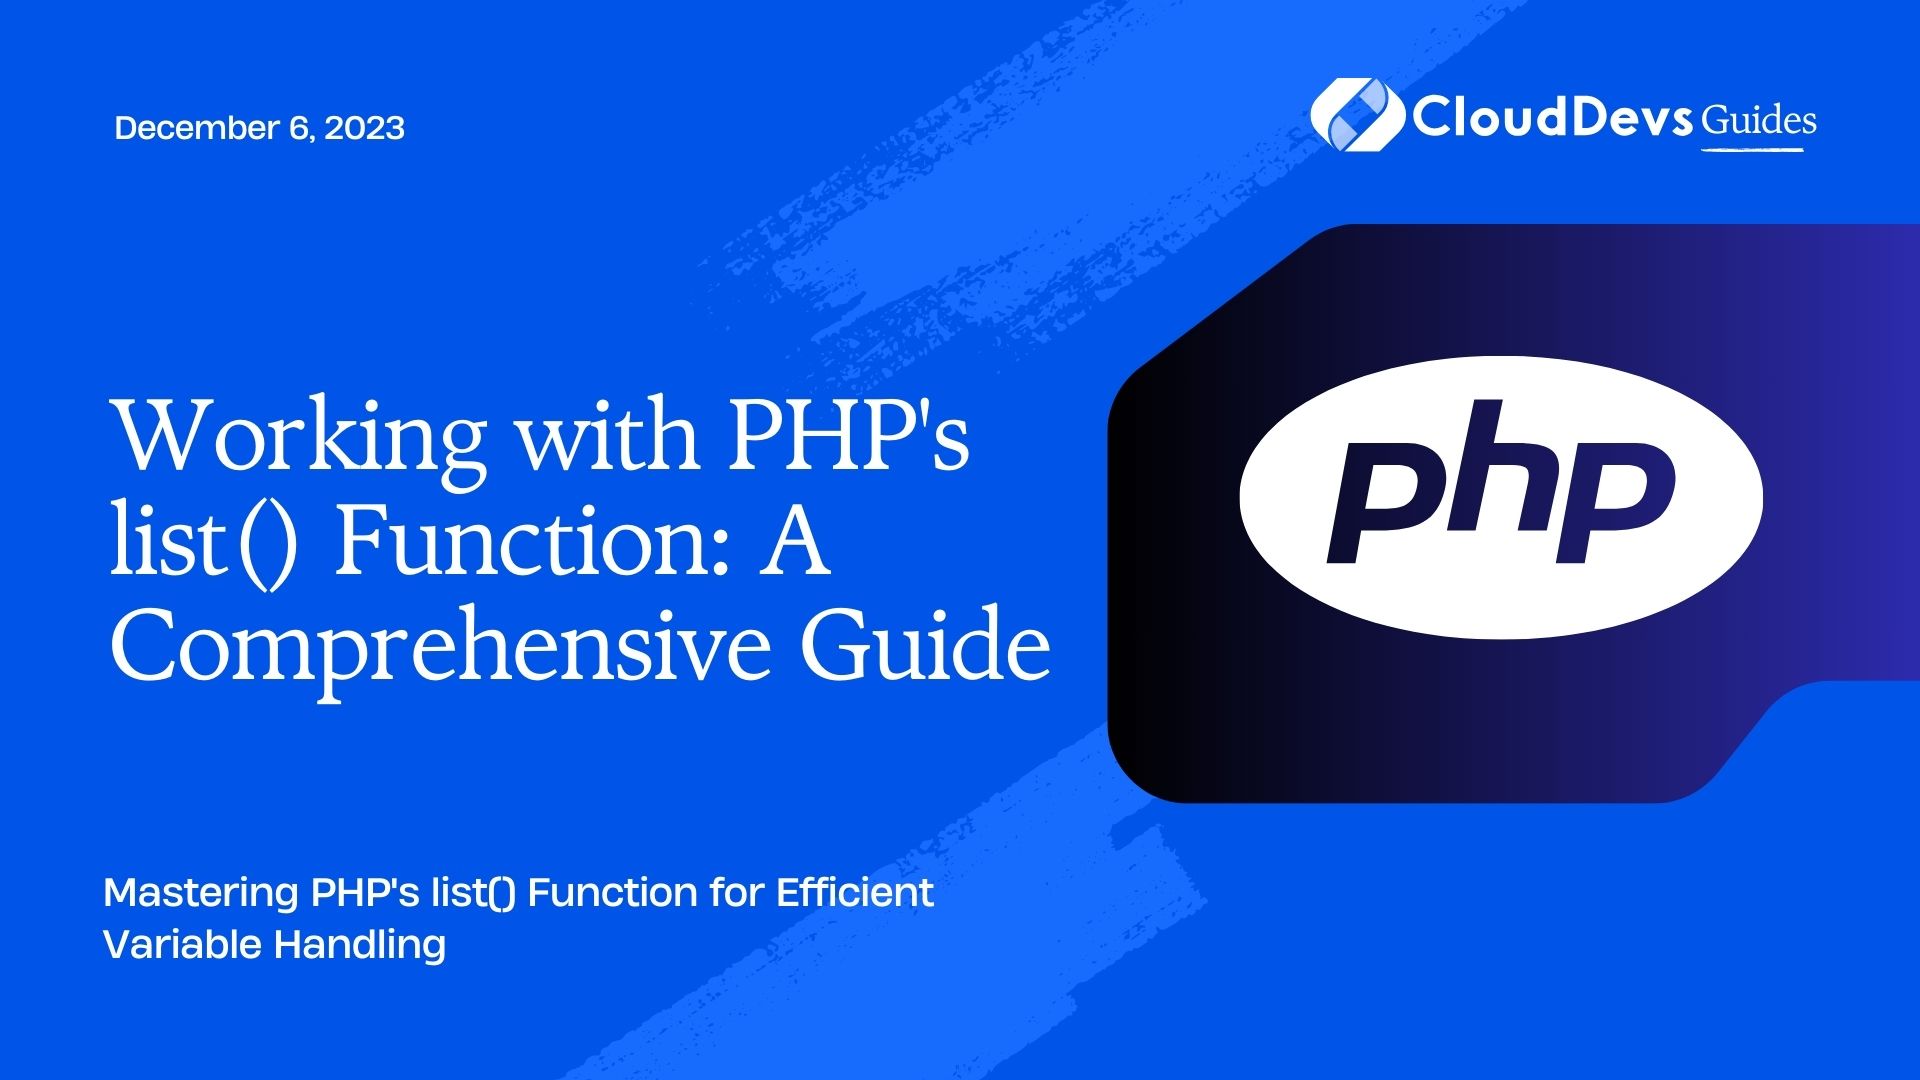 Working with PHP's list() Function: A Comprehensive Guide